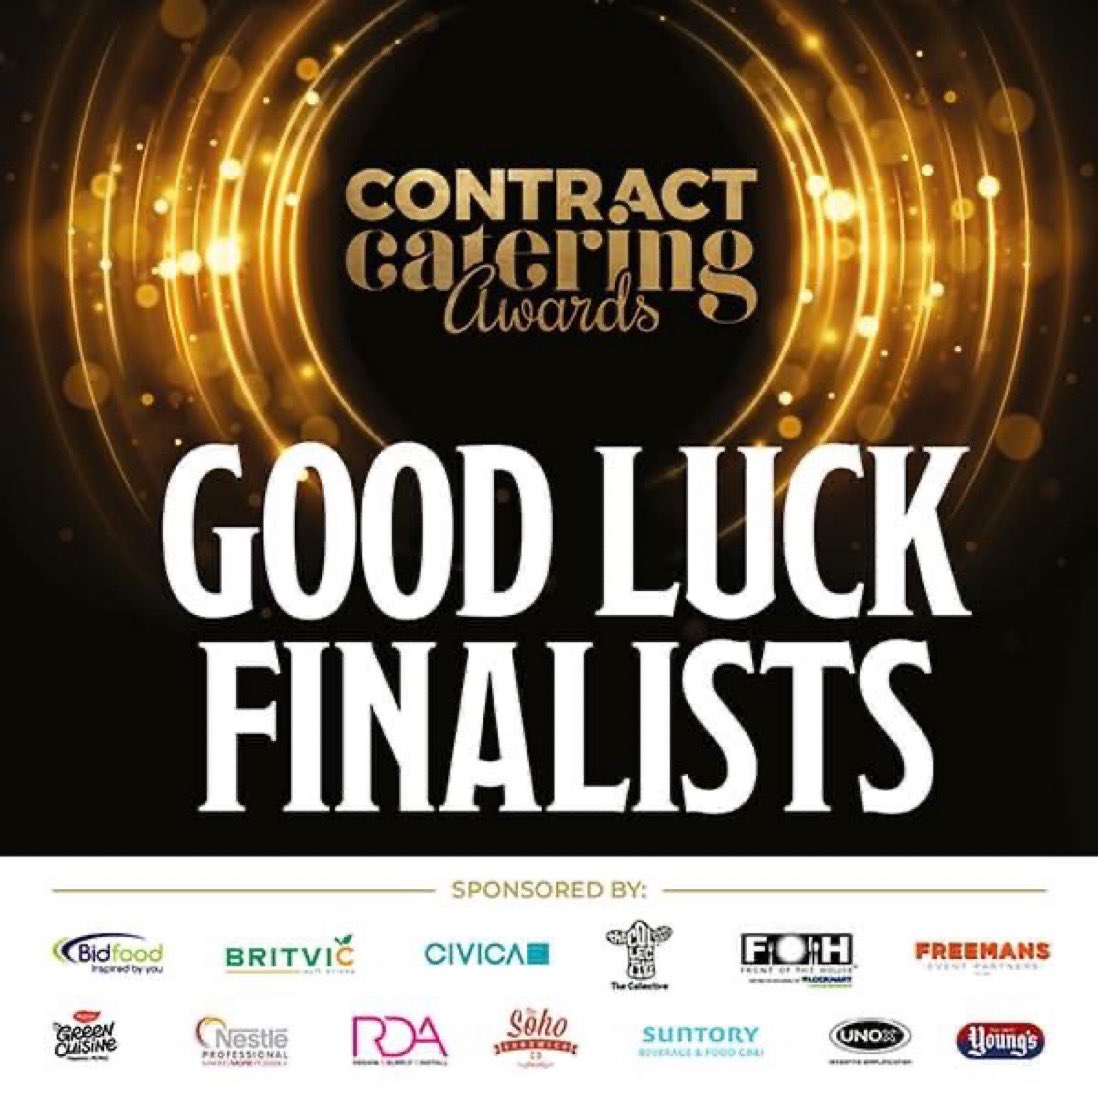 Good luck to all finalists from table 9! #contractcateringawards